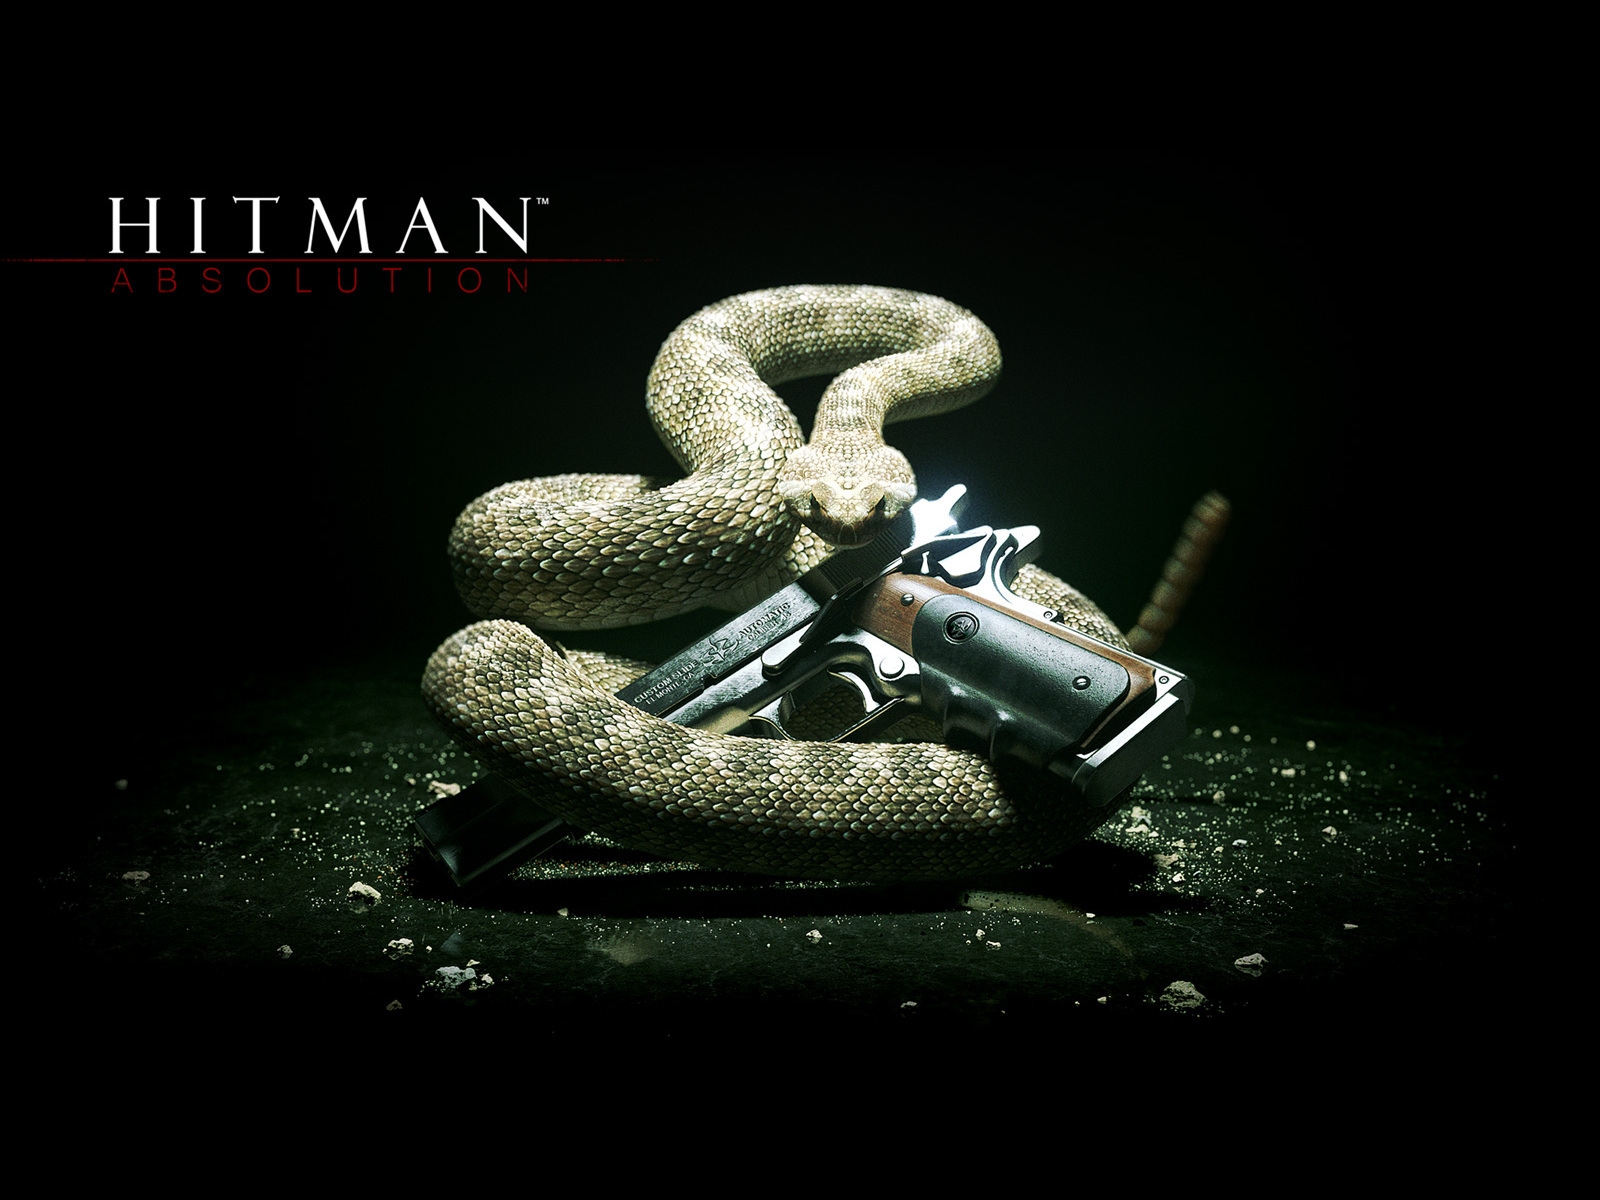 Hitman Absolution Game for 1600 x 1200 resolution